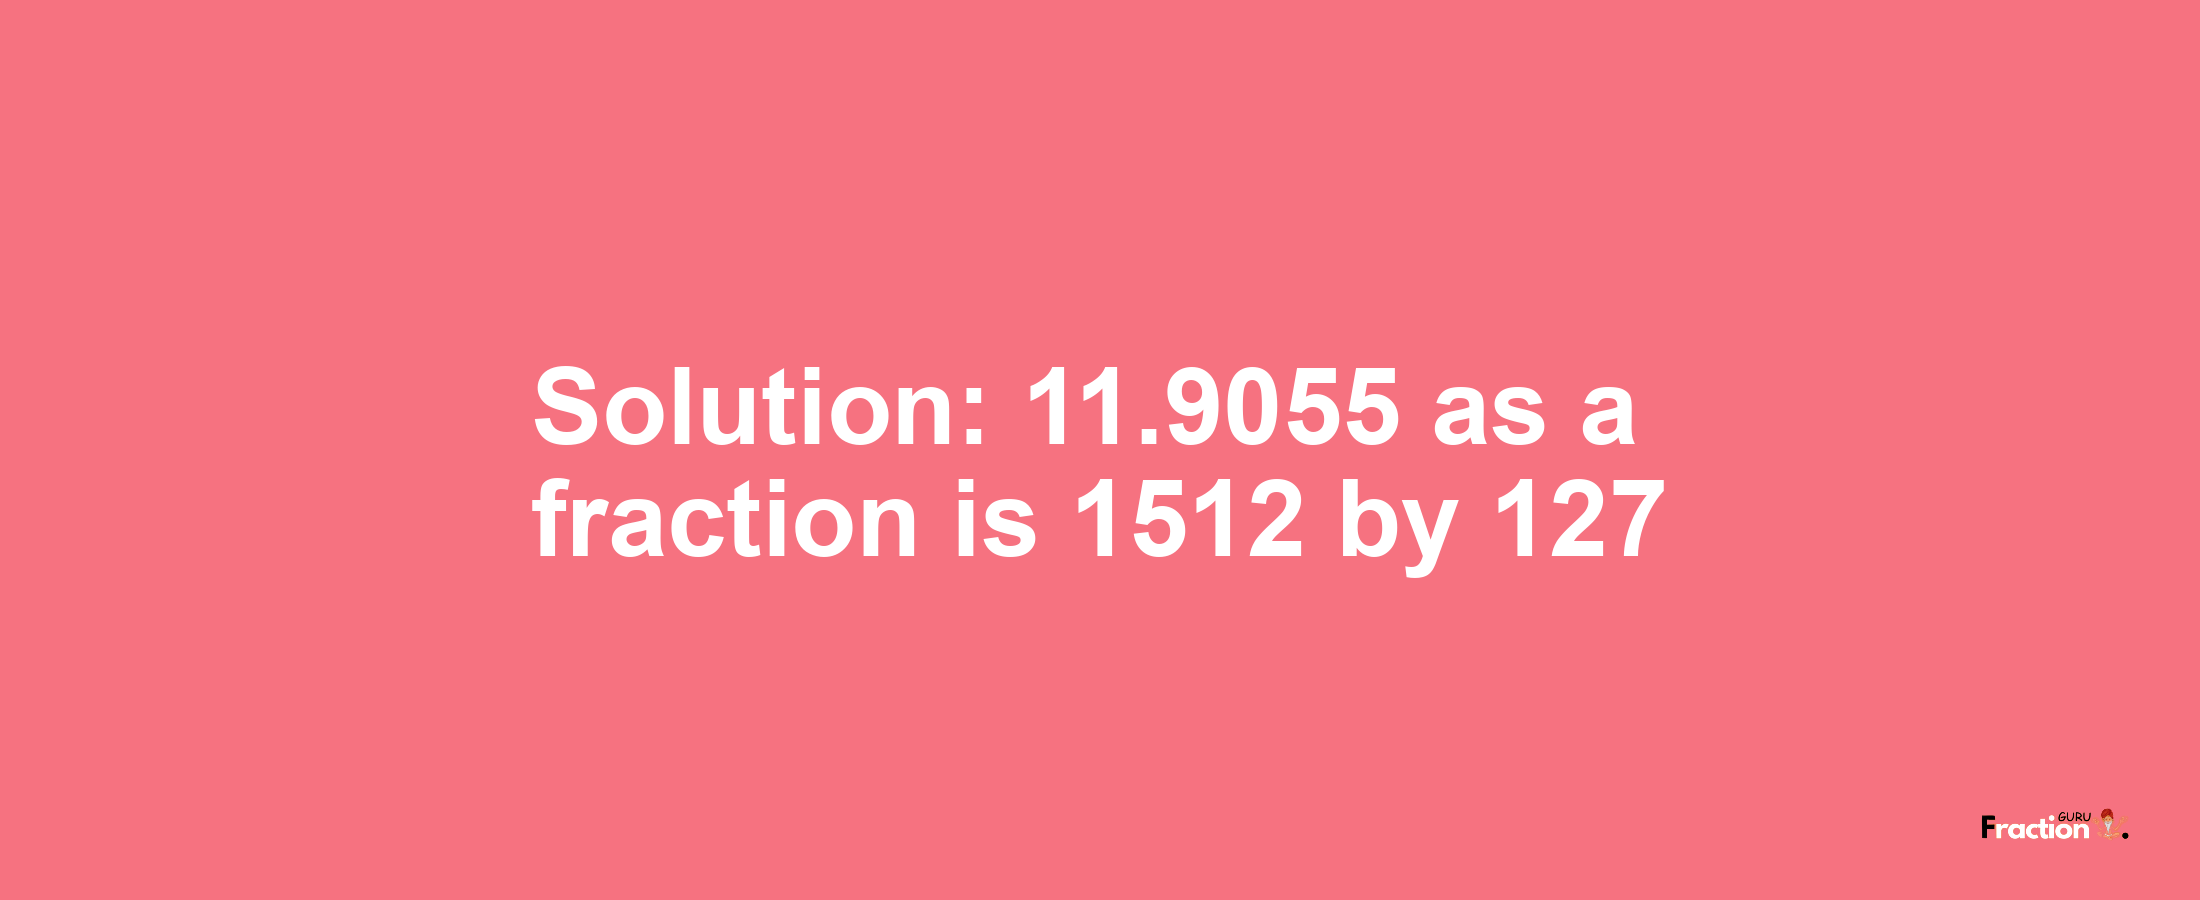 Solution:11.9055 as a fraction is 1512/127